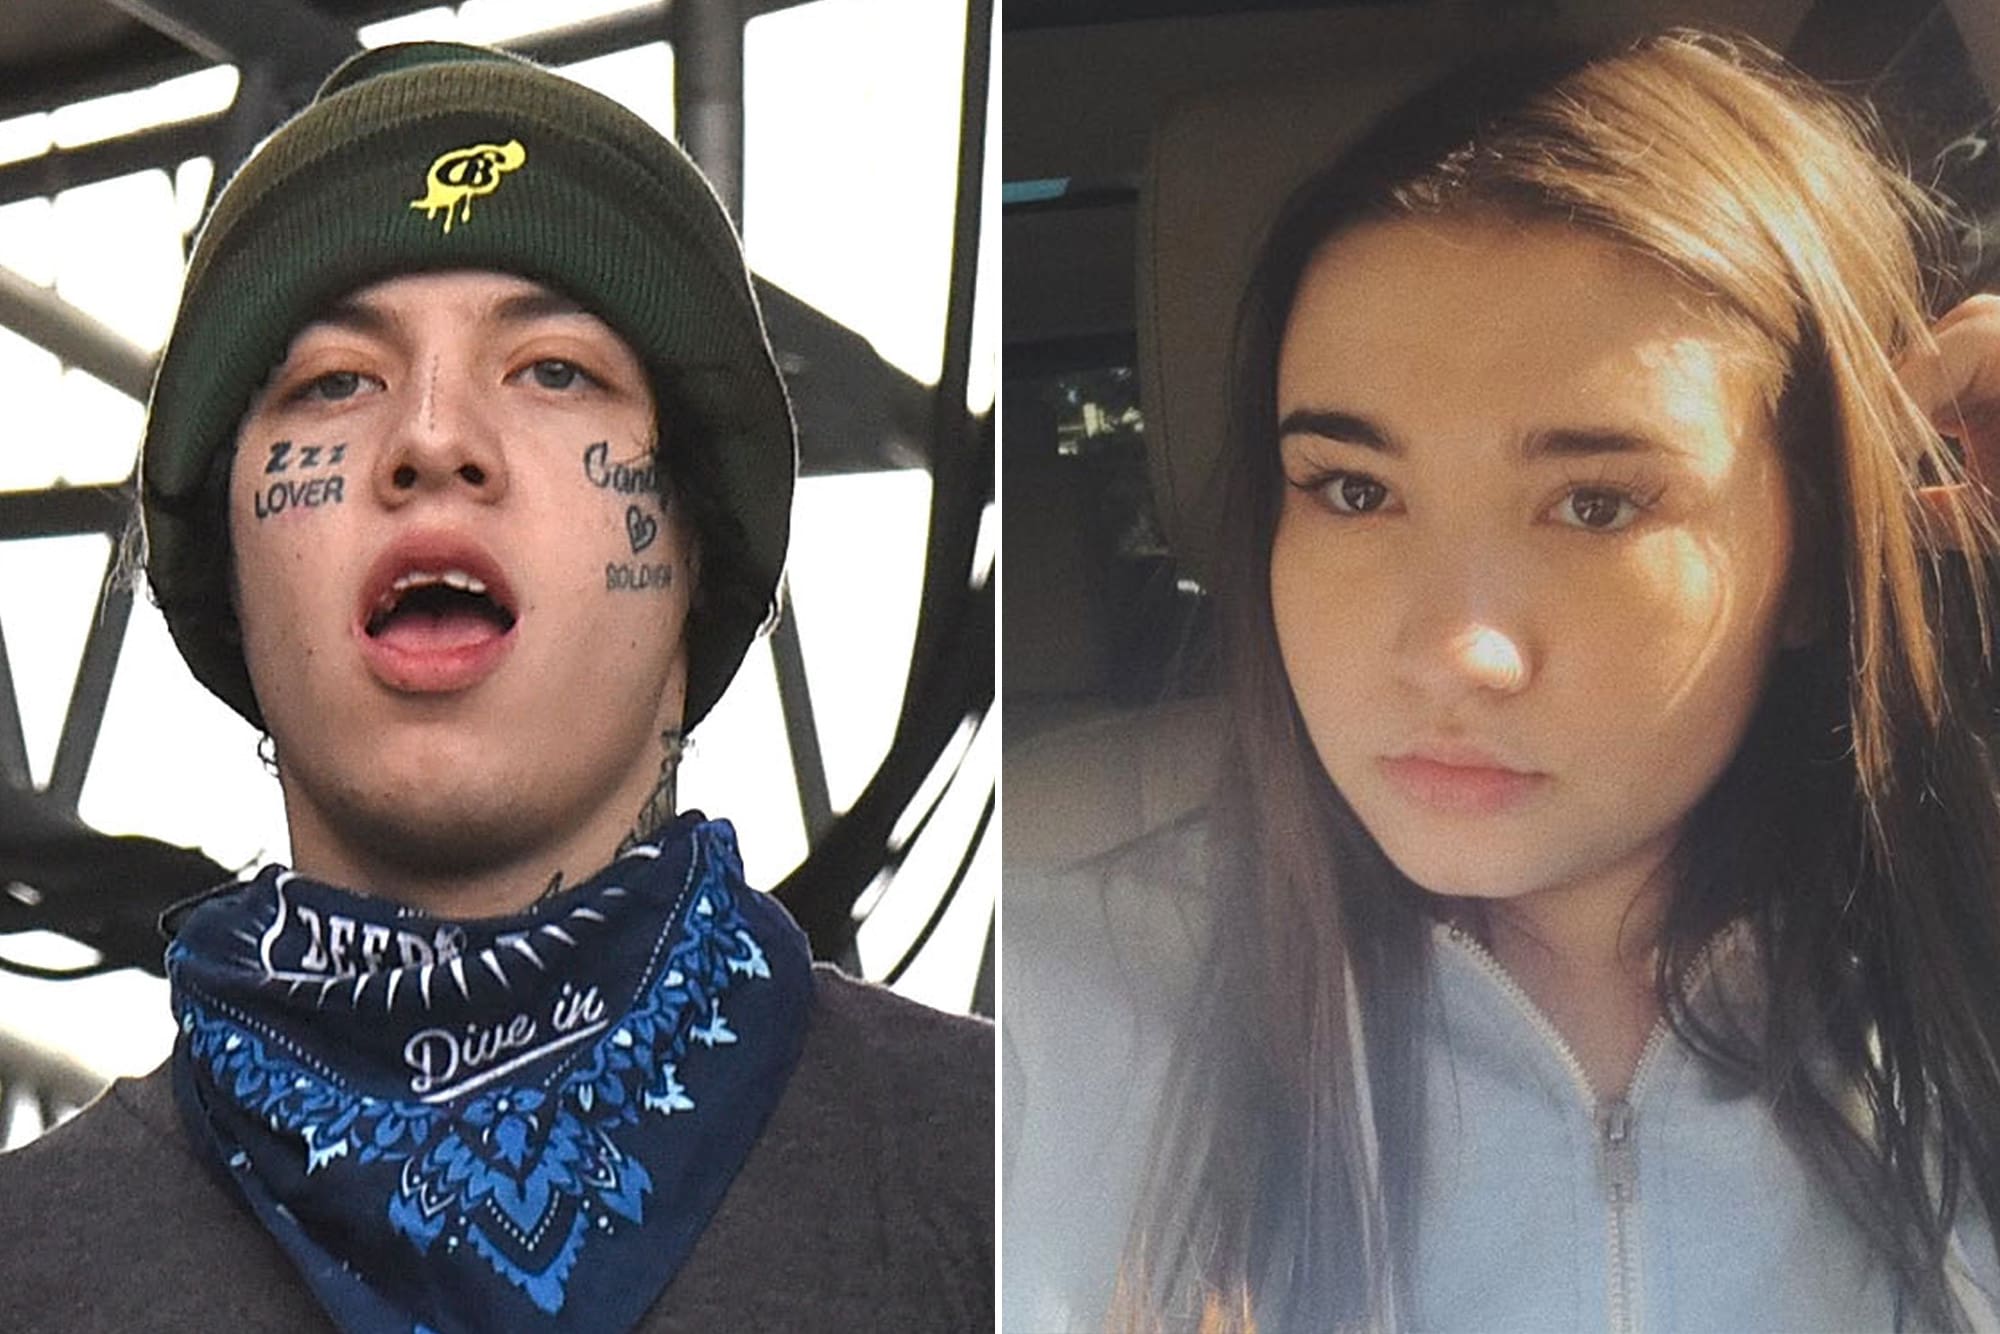 ”lil-xans-fiancee-annie-smith-says-the-internet-has-ruined-her-pregnancy-heres-why”